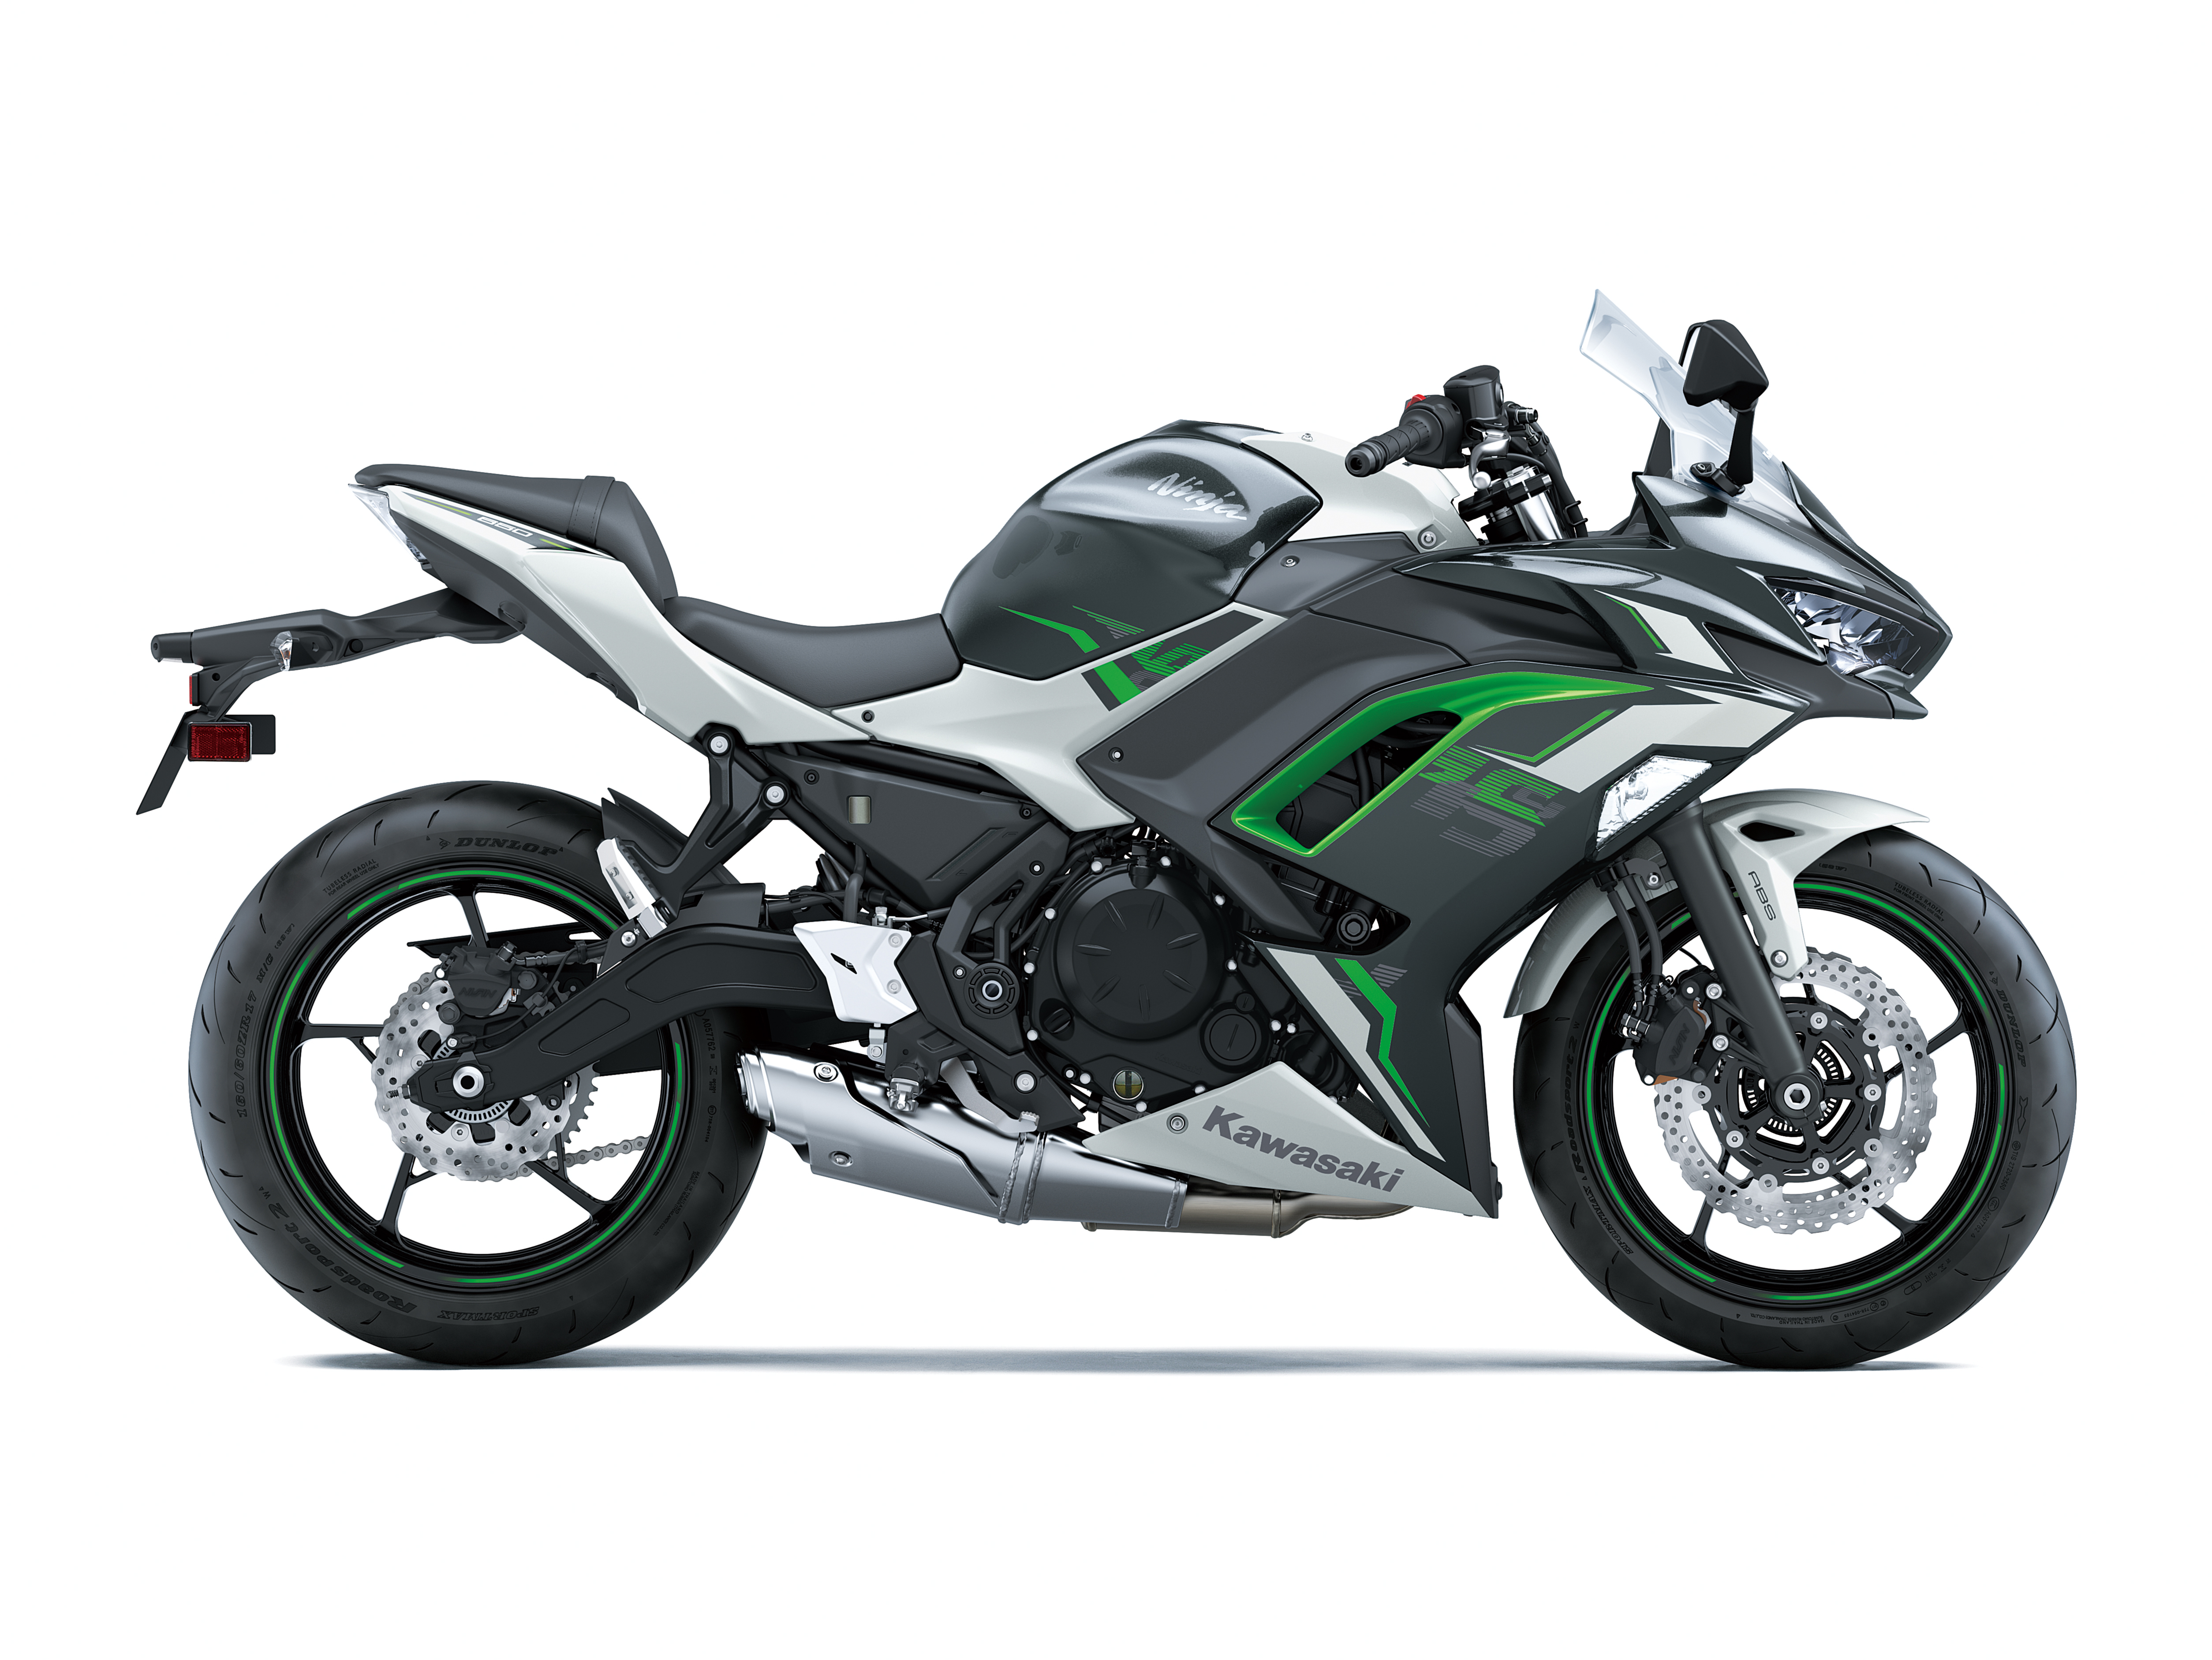 https://kawasakileisurebikes.ph/assets/img-motorcycles/selected/images/22EX650M-44SWT1DRS3CG-A.jpg